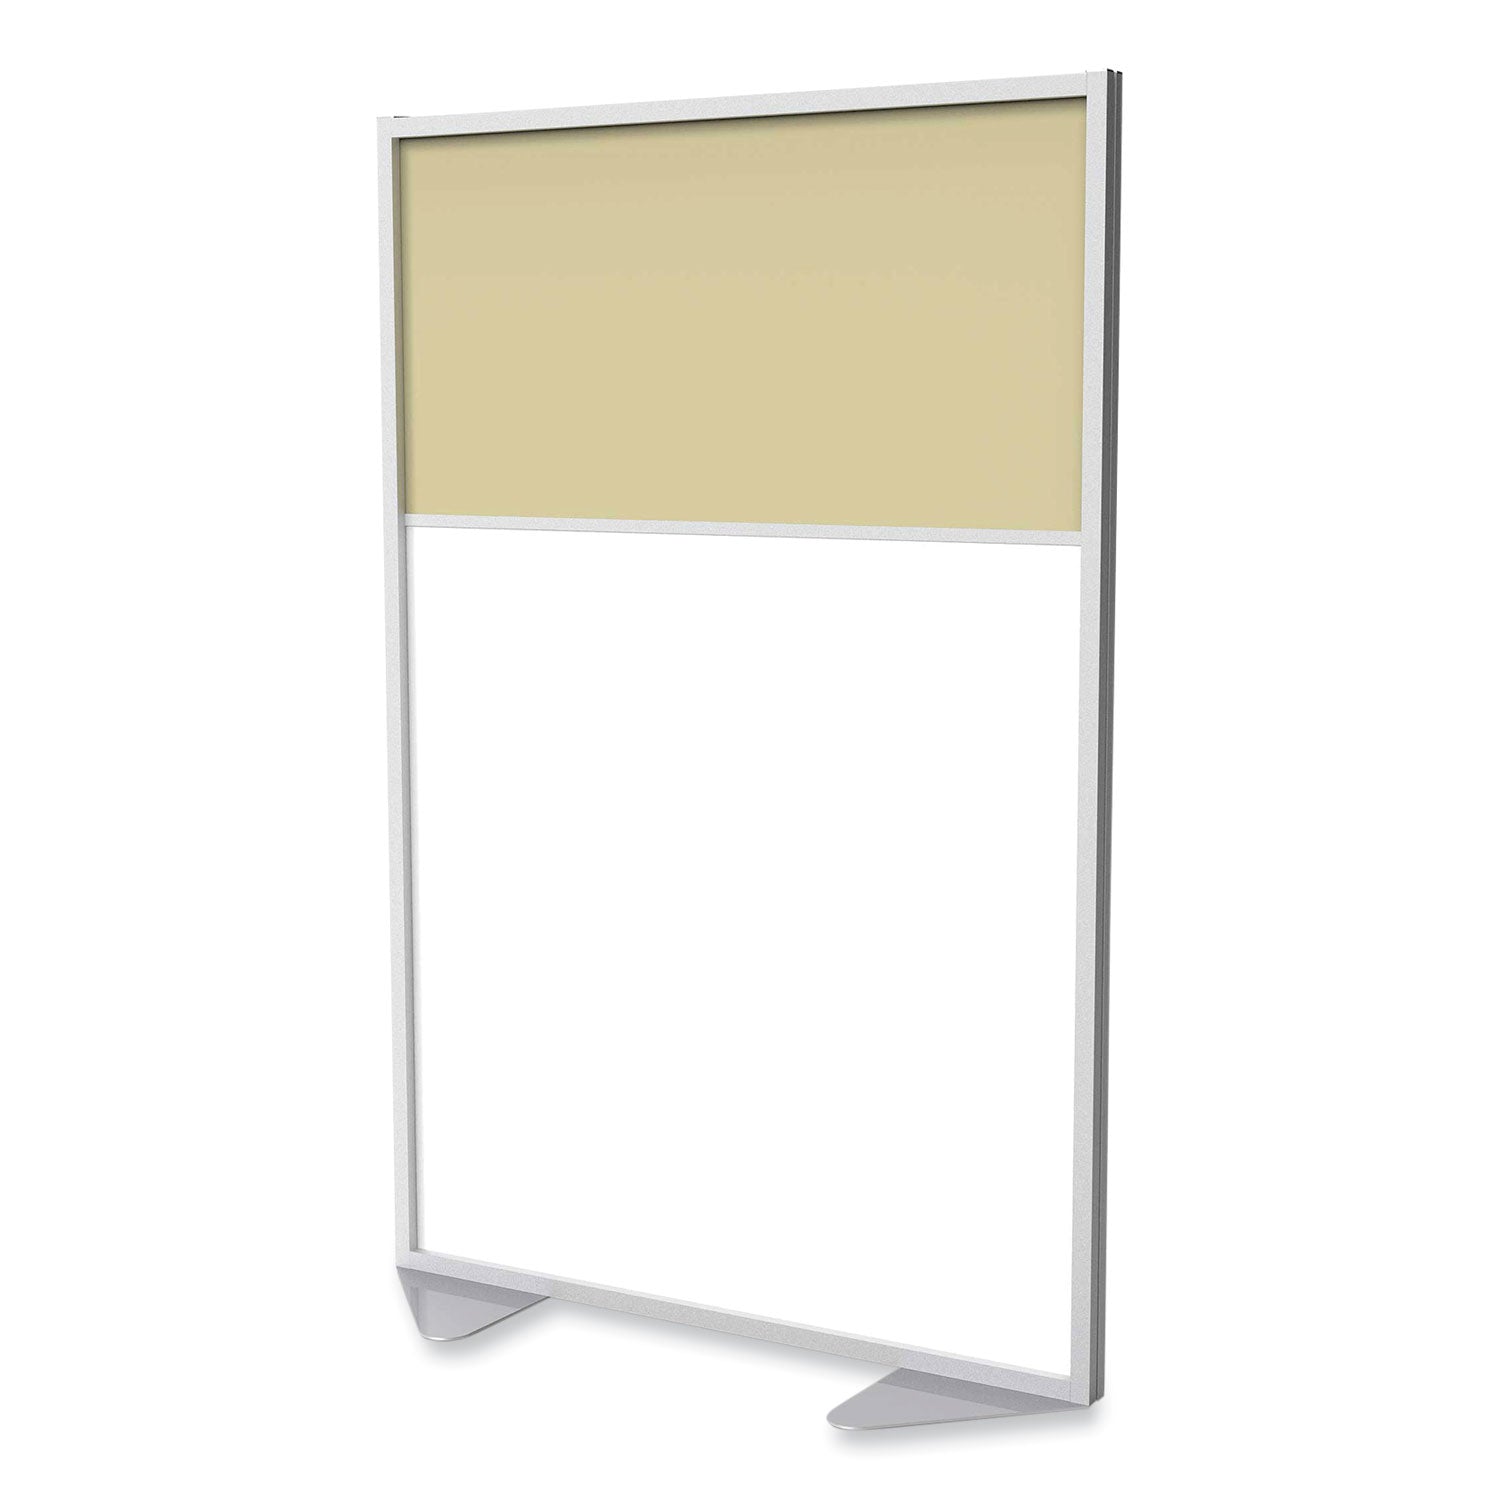 floor-partition-with-aluminum-frame-and-2-split-panel-infill-4806-x-204-x-7186-white-carmel-ships-in-7-10-business-days_ghemp7248208a - 1